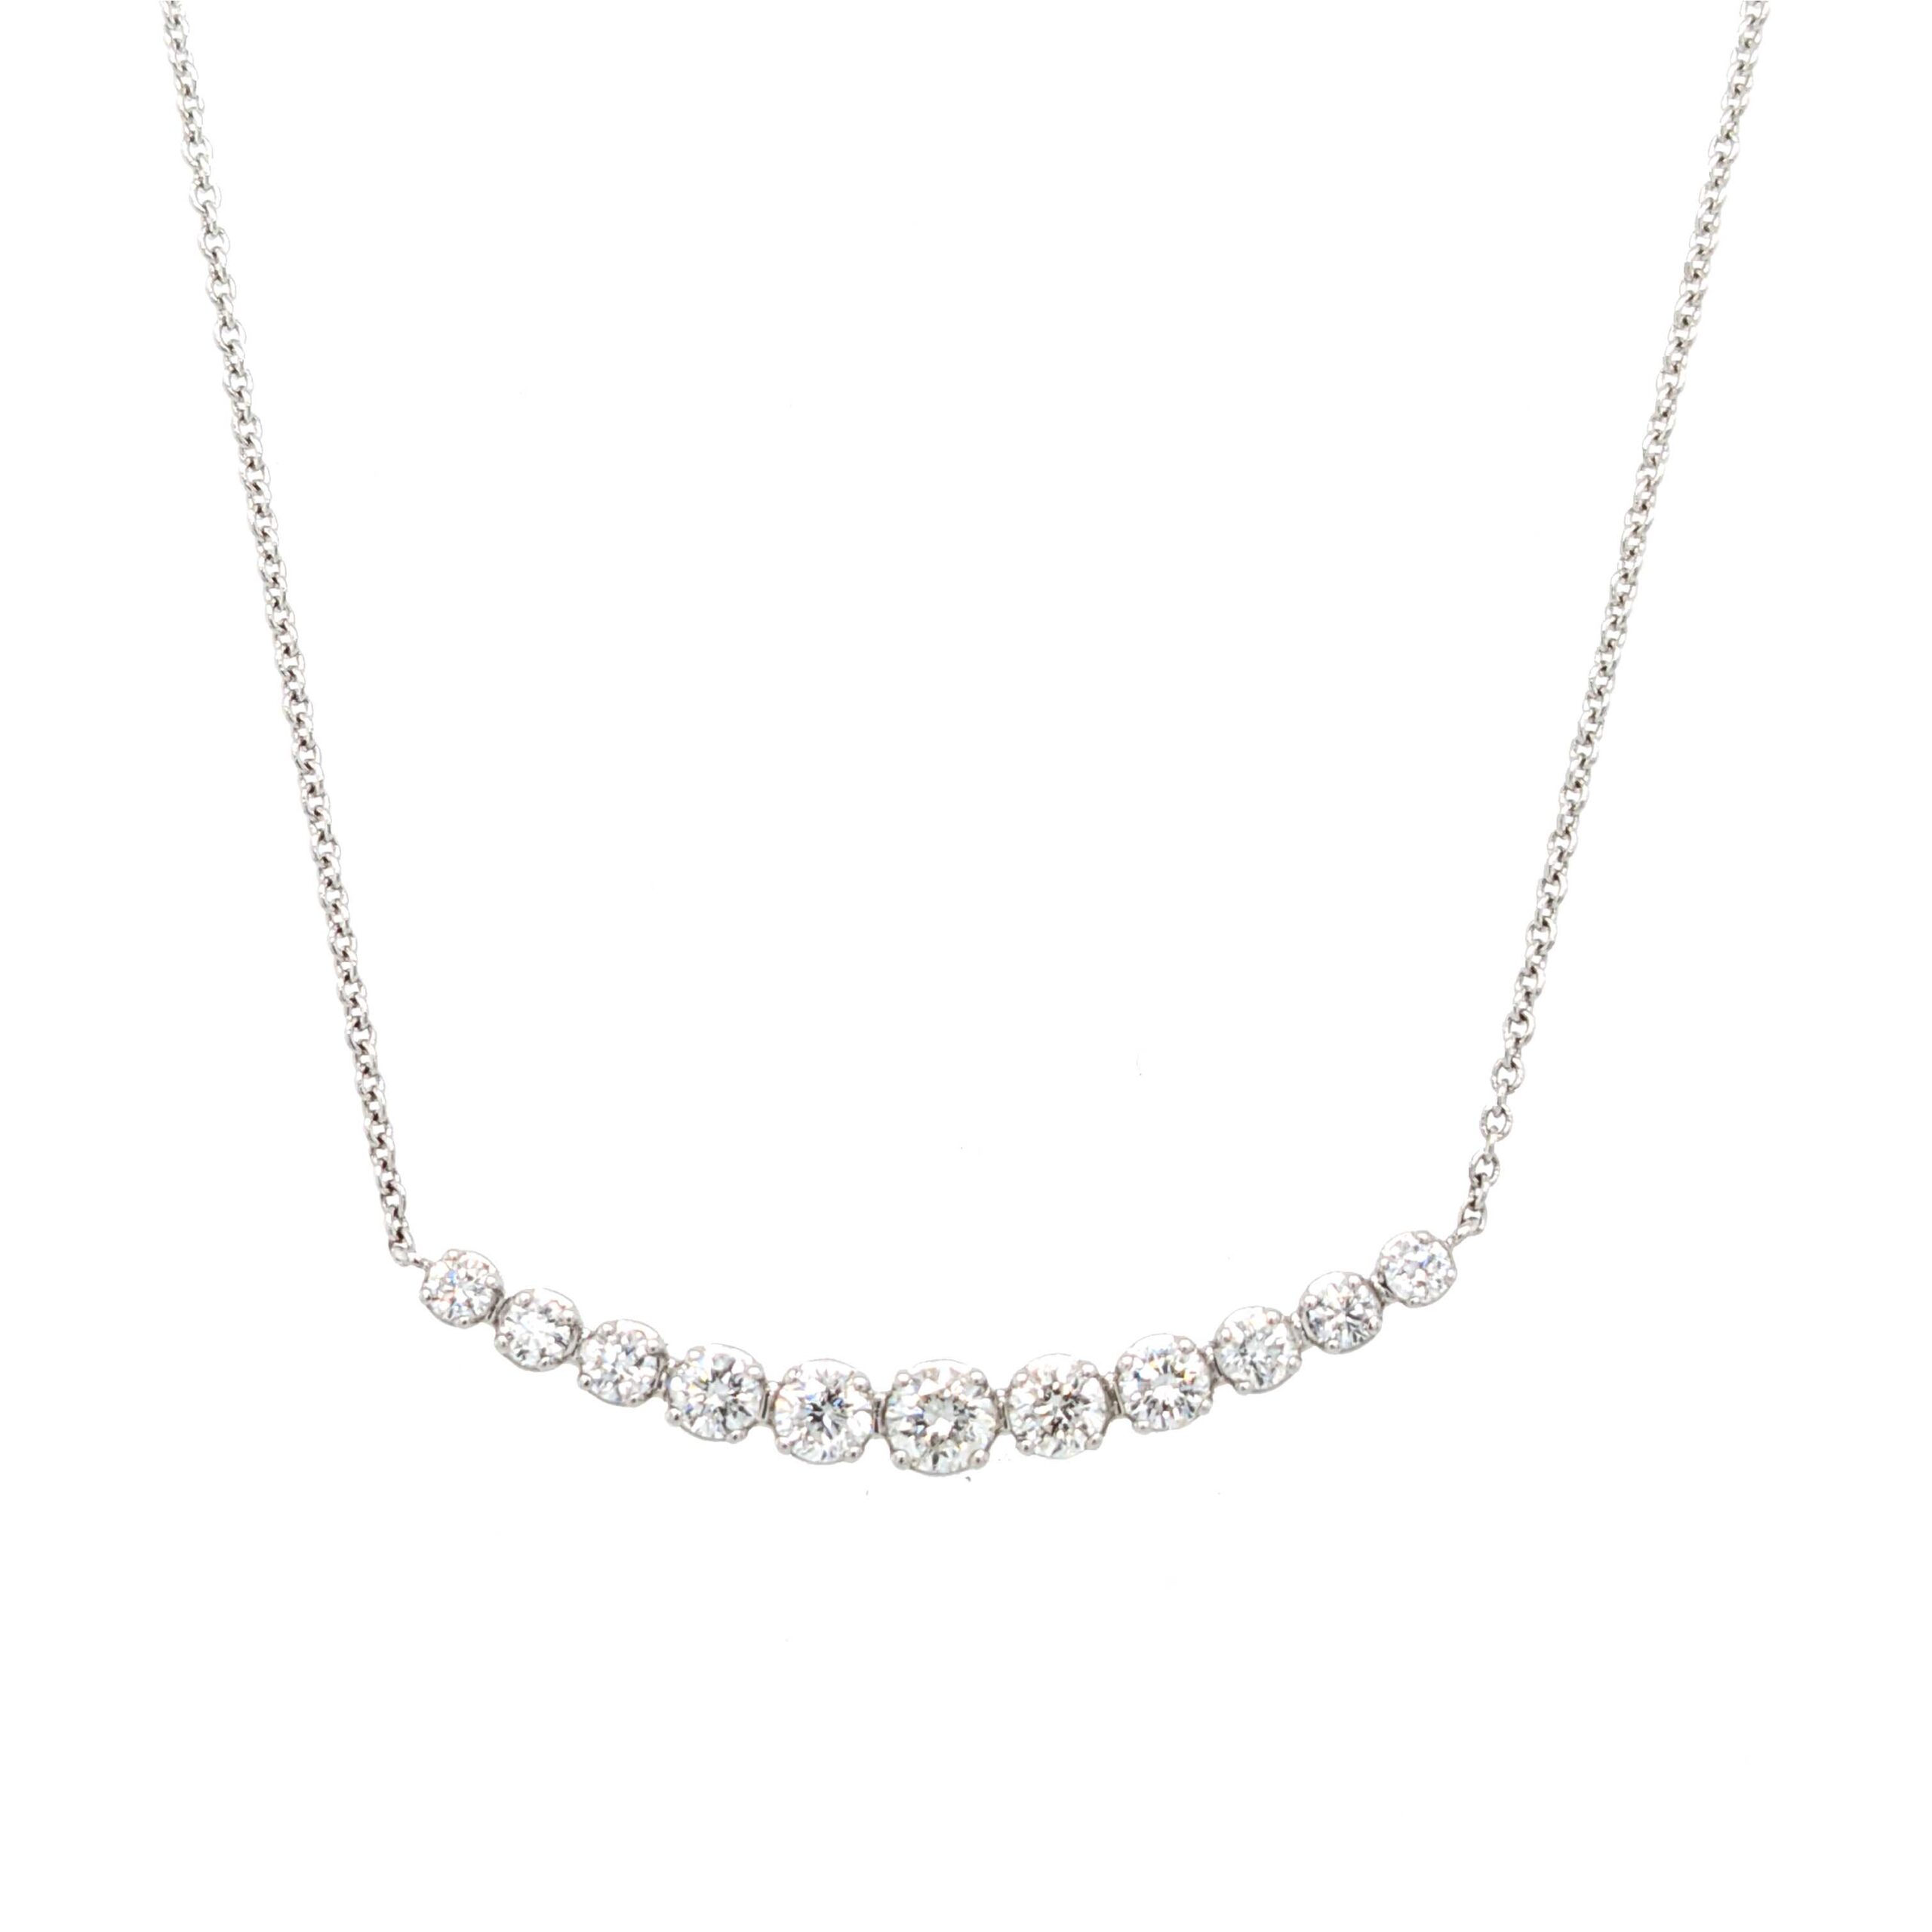 18ct white gold graduated diamond necklace on Sally Thorntons jewellery blog from AA Thornton Kettering Northampton 